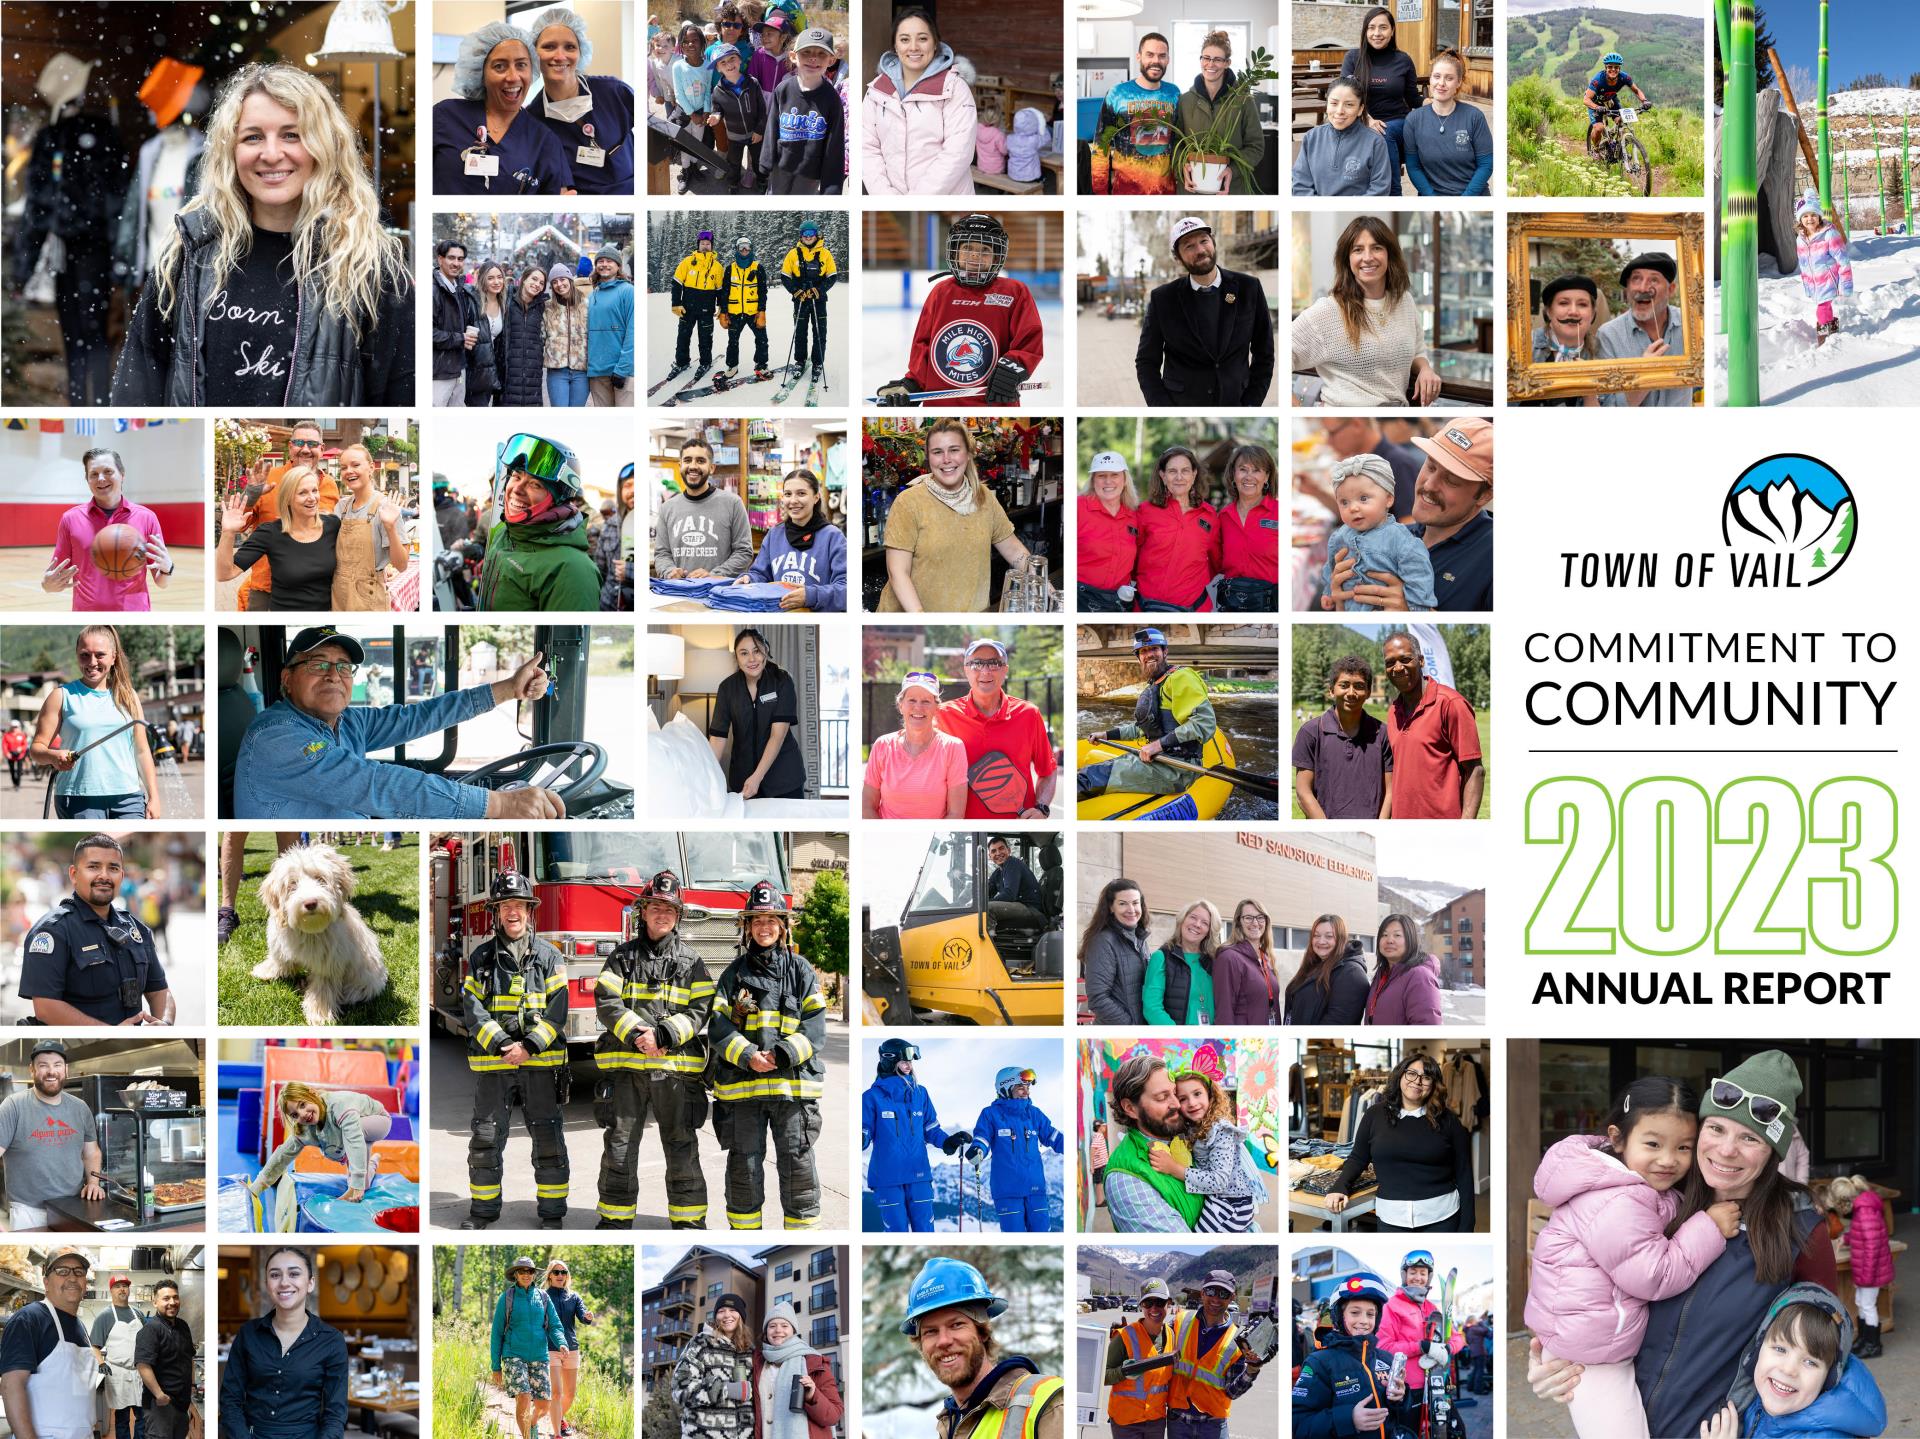 Collage of faces of the many different people that make up the Vail community from people at their place of work to out enjoying Vail, young and old, families and singles.